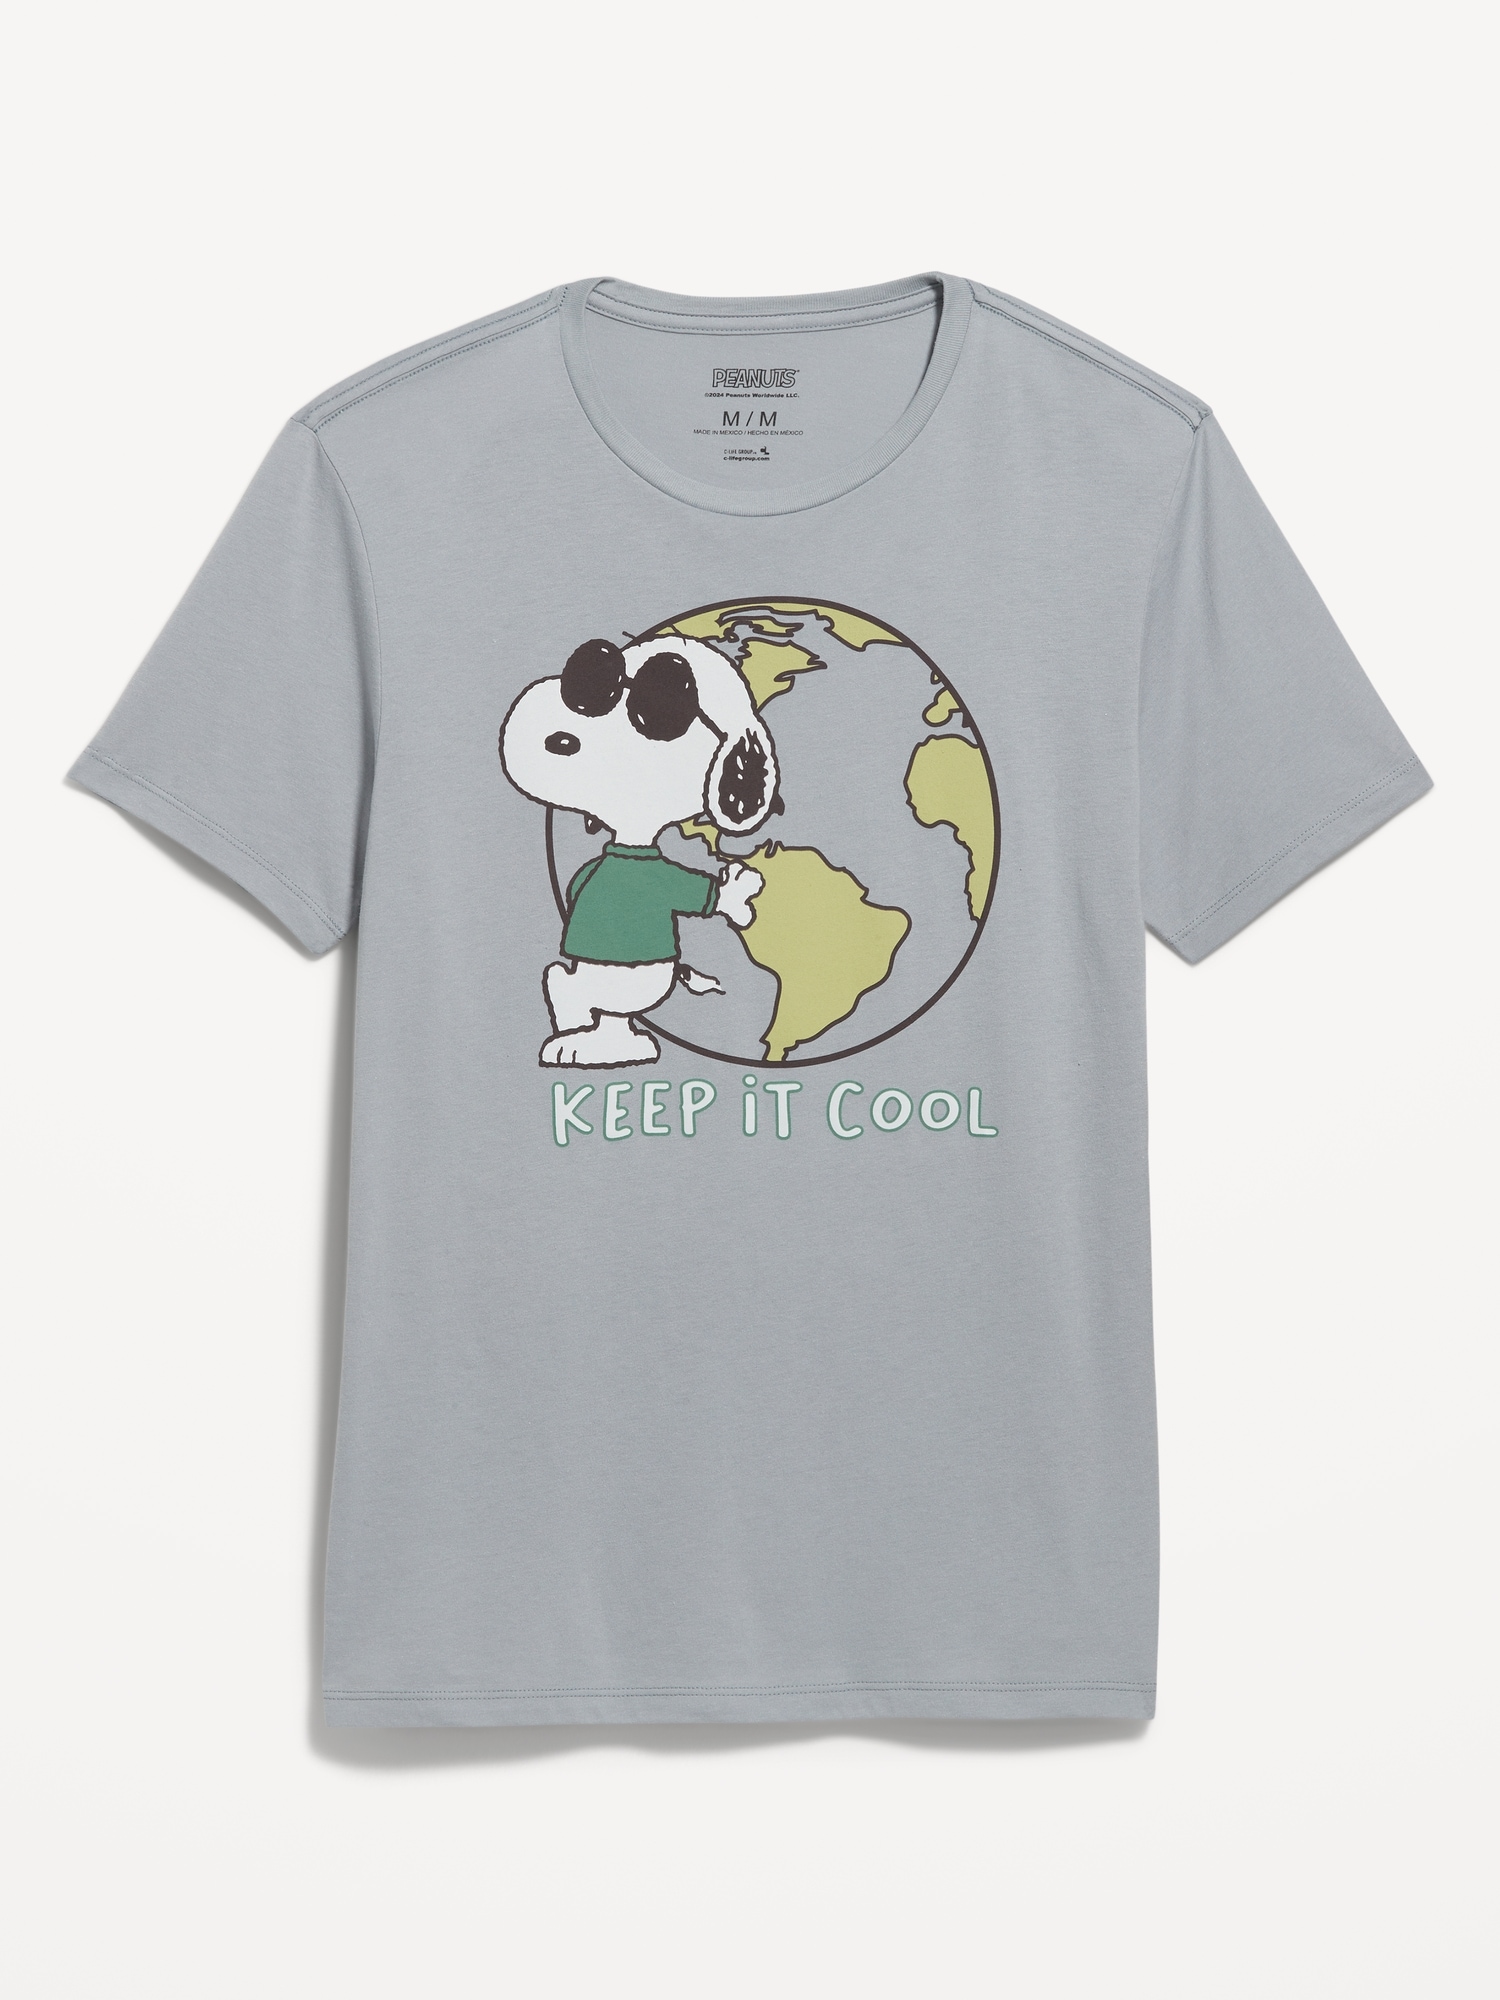 Peanuts Snoopy Gender-Neutral T-Shirt for Adults